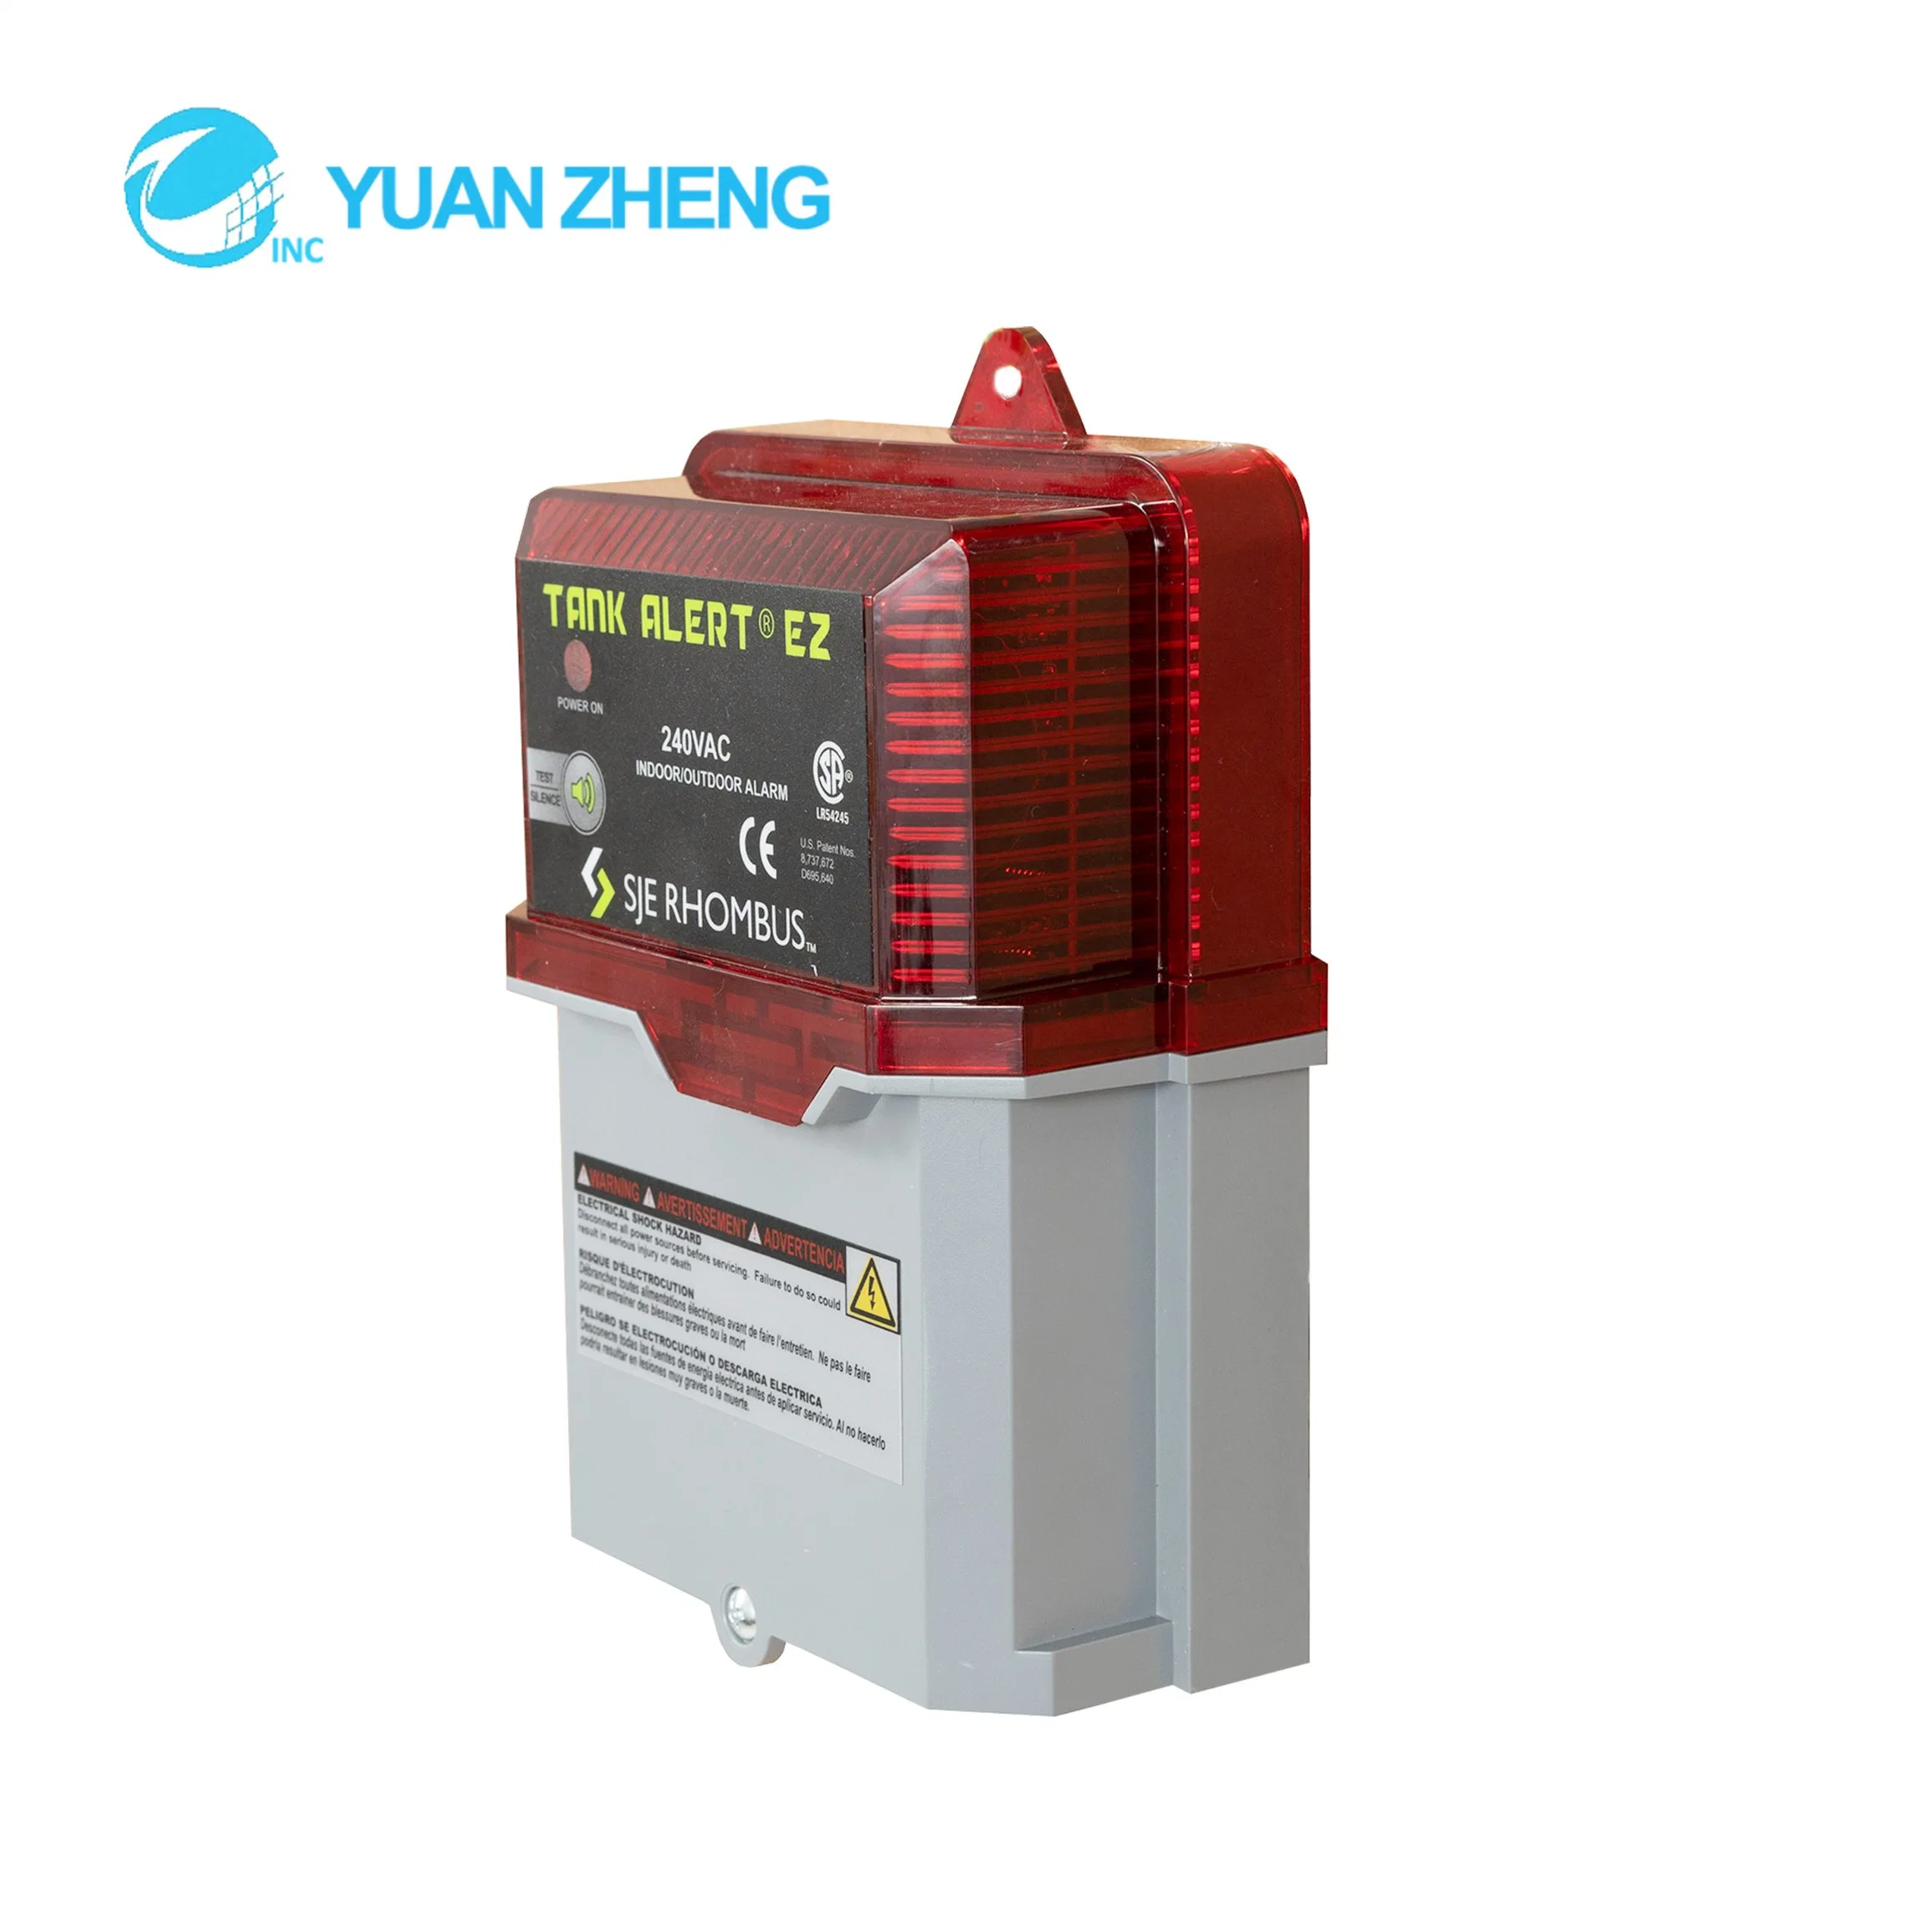 Lifting Pump System Alarm, with Sound and Visuable Alarm, Easy and Safe to Use